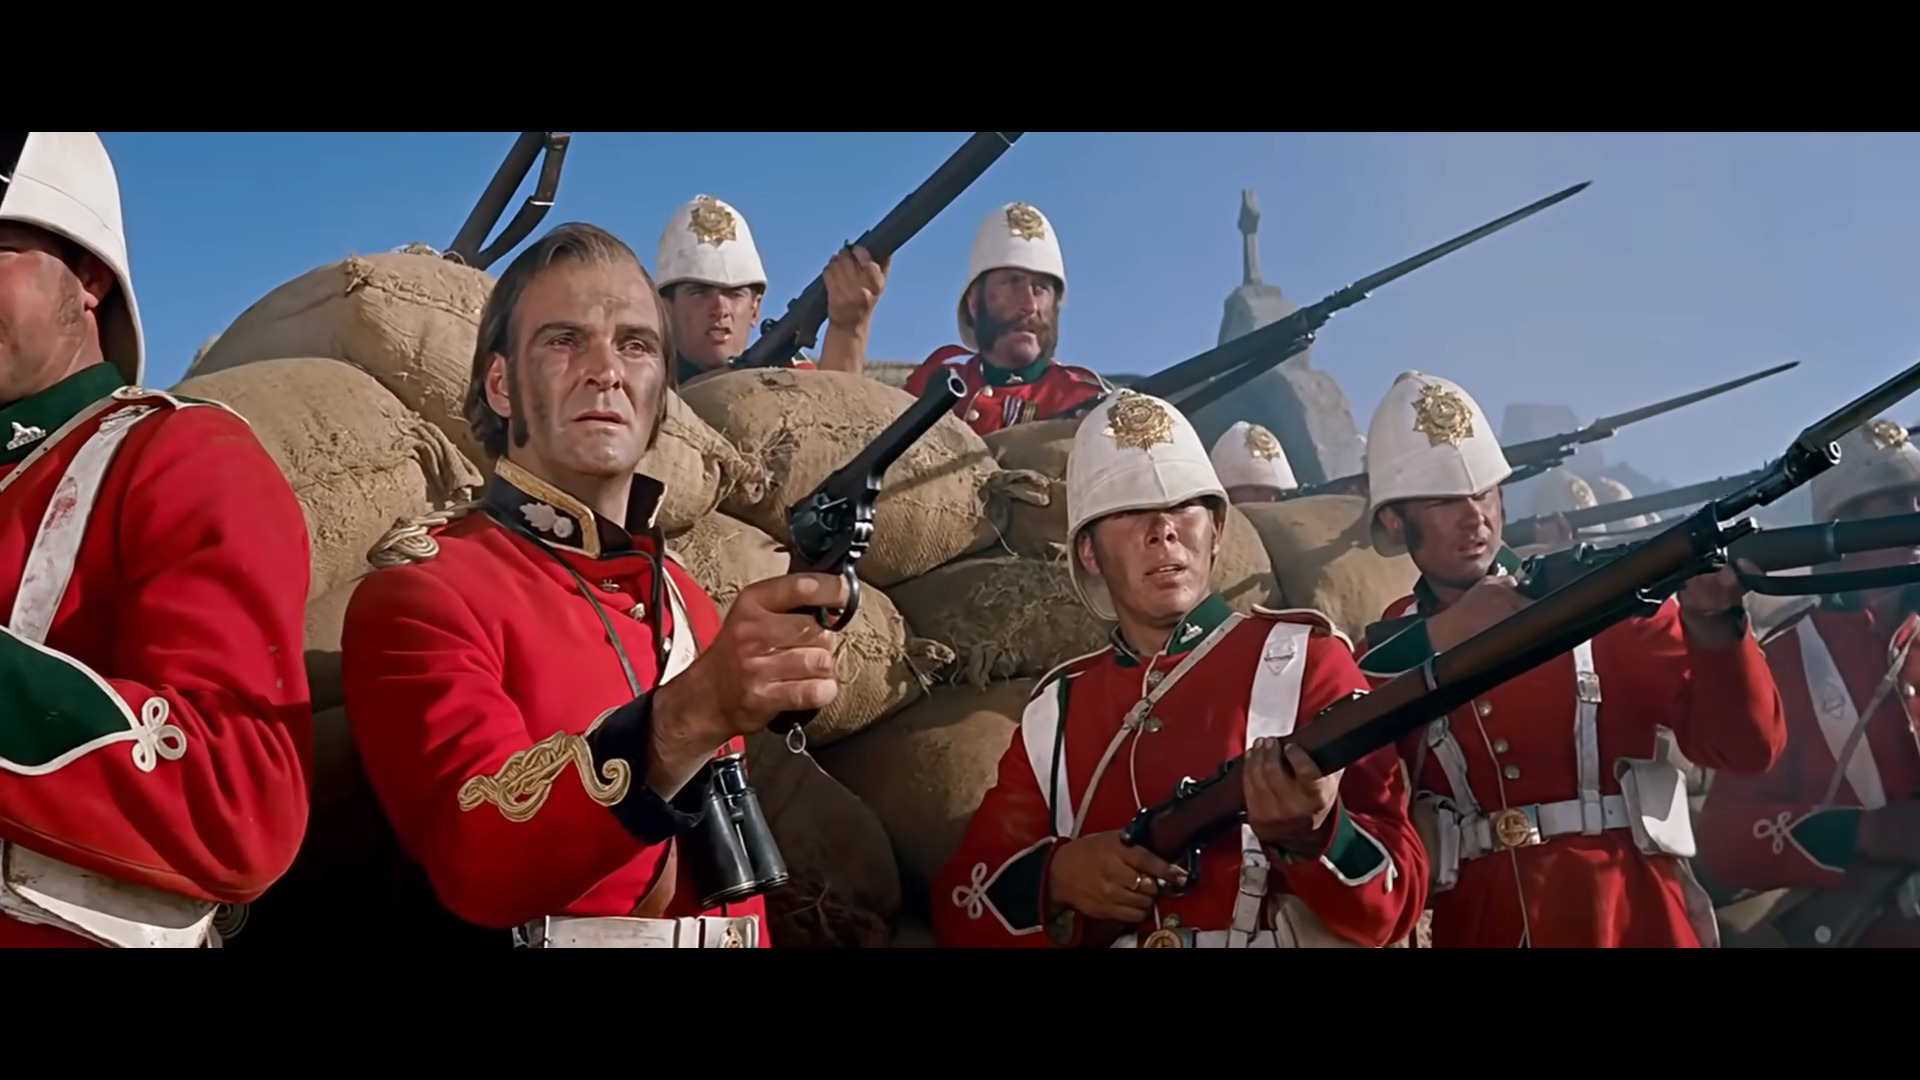 The British army hold their fire after successfully repelling the Zulu in Zulu (1964), Diamond Films